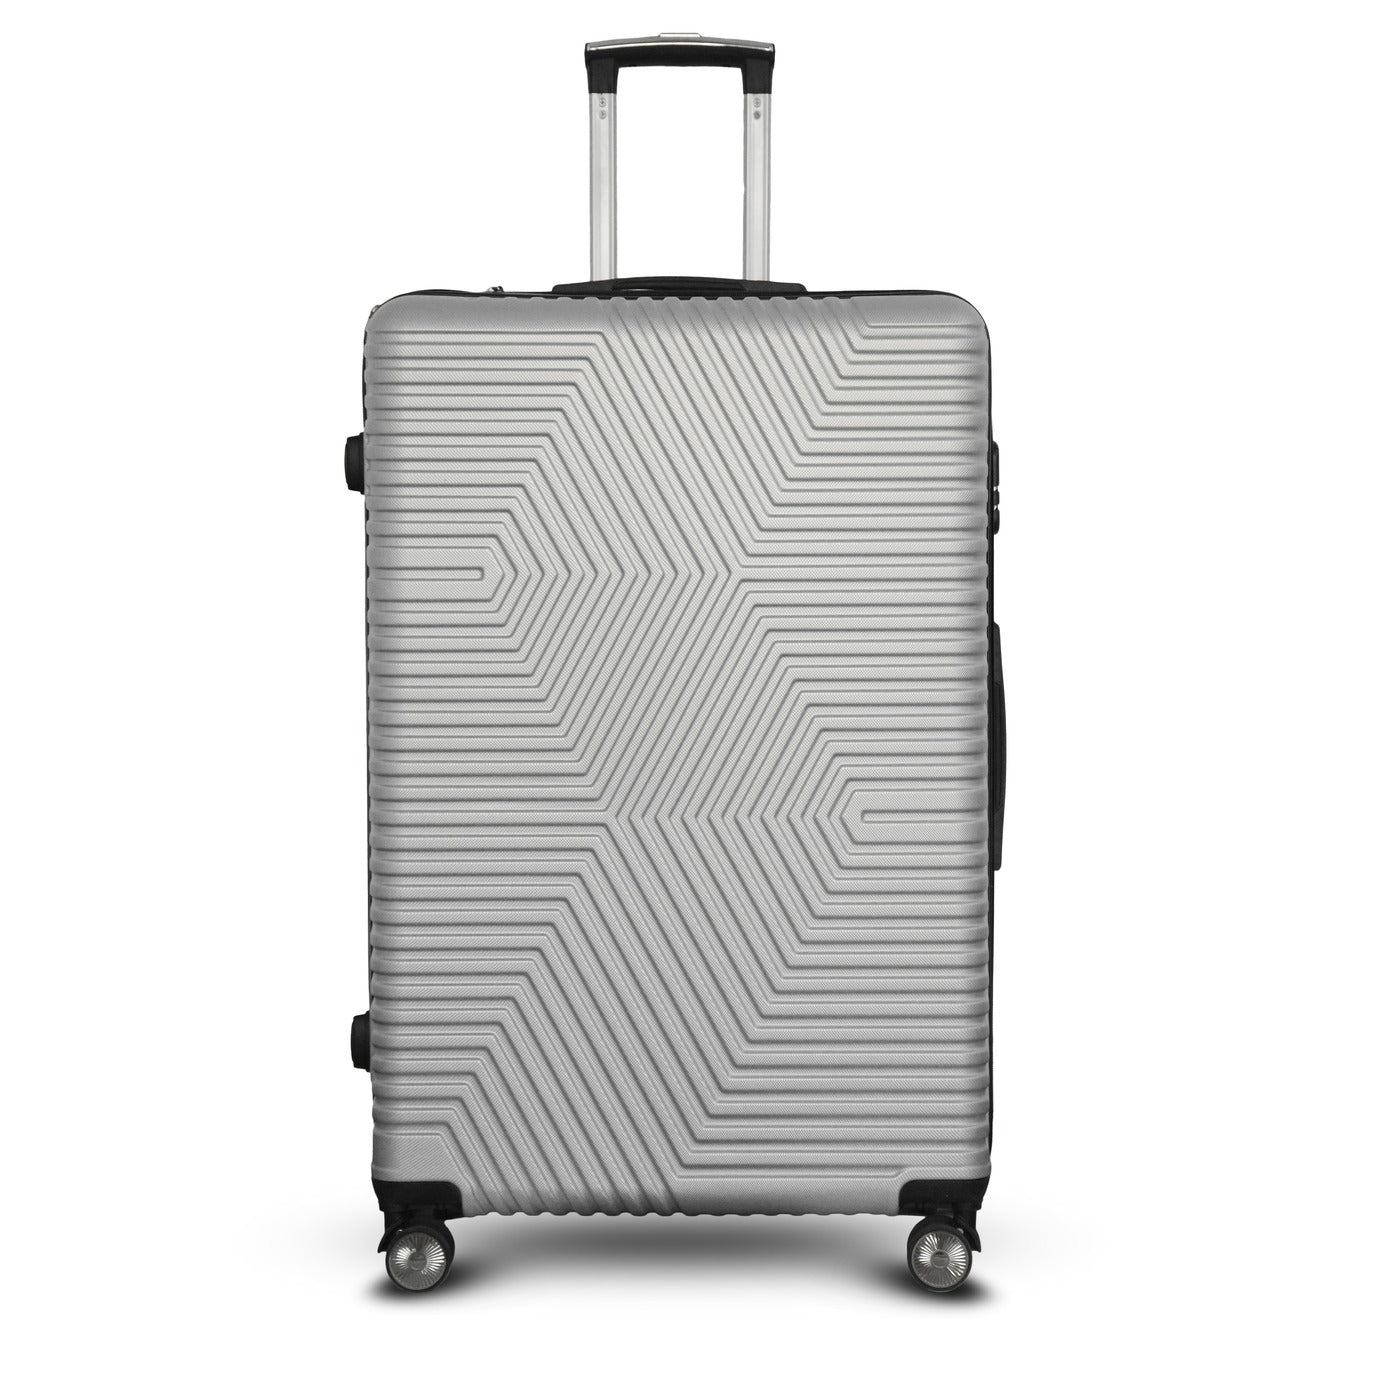 24" Zig Zag ABS Lightweight Luggage Bag With Double Spinner Wheel